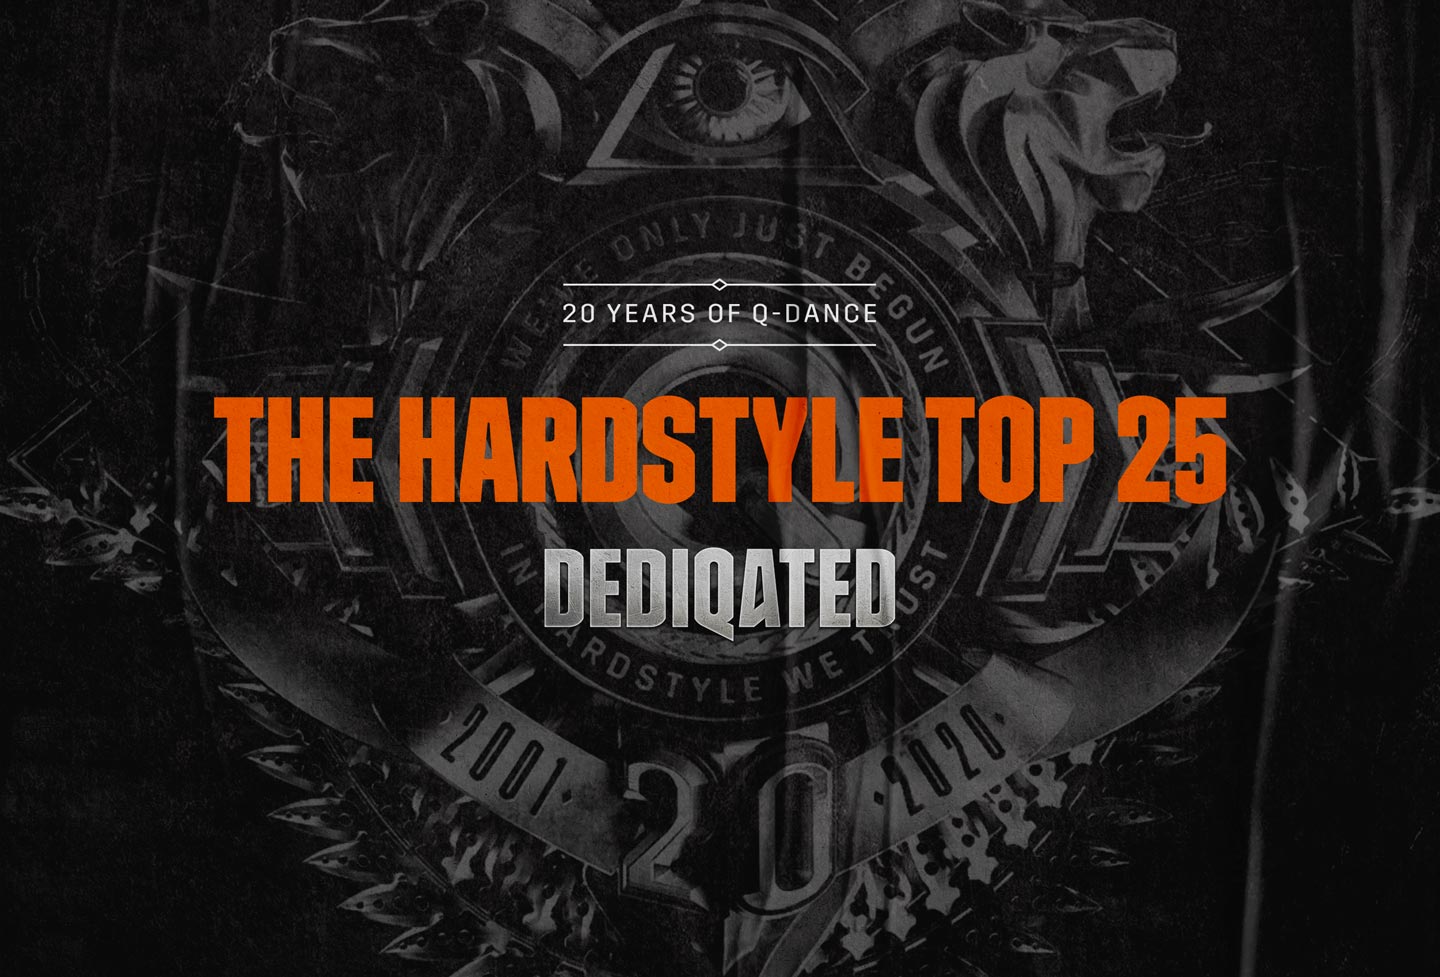 Q-Dance Mở Cổng Bình Chọn Hardstyle Top 25 of All Time